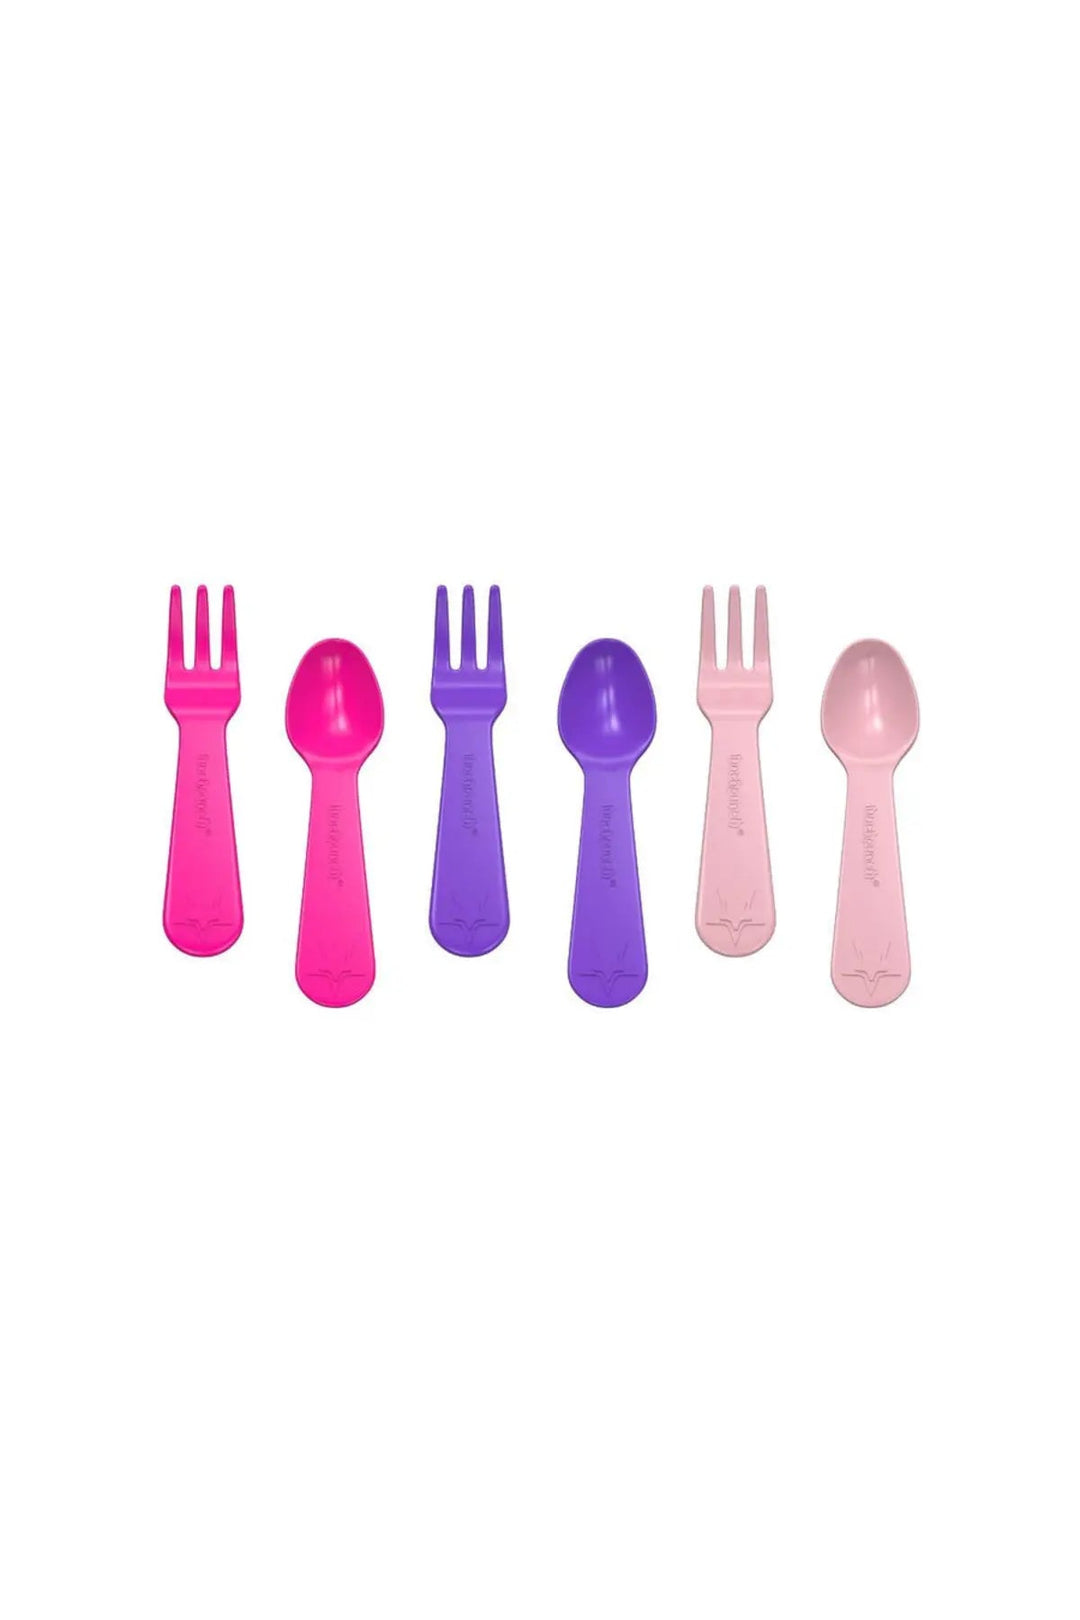 Lunch Punch Fork & Spoon Set – Pink - #HolaNanu#NDIS #creativekids